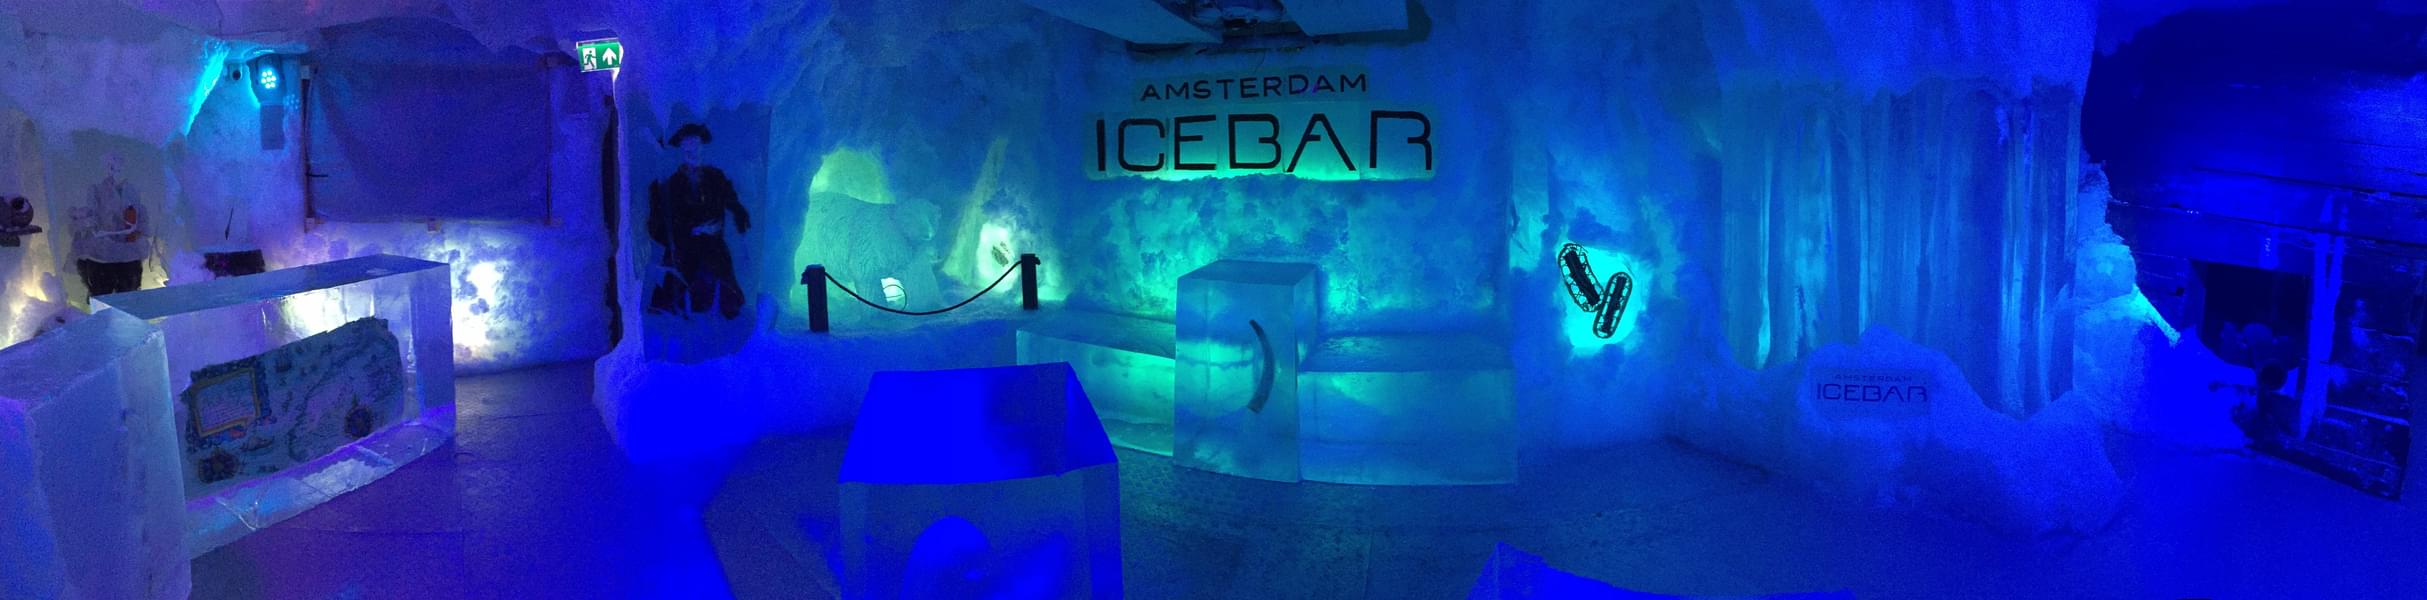 Chill at Xtracold Icebar Experience